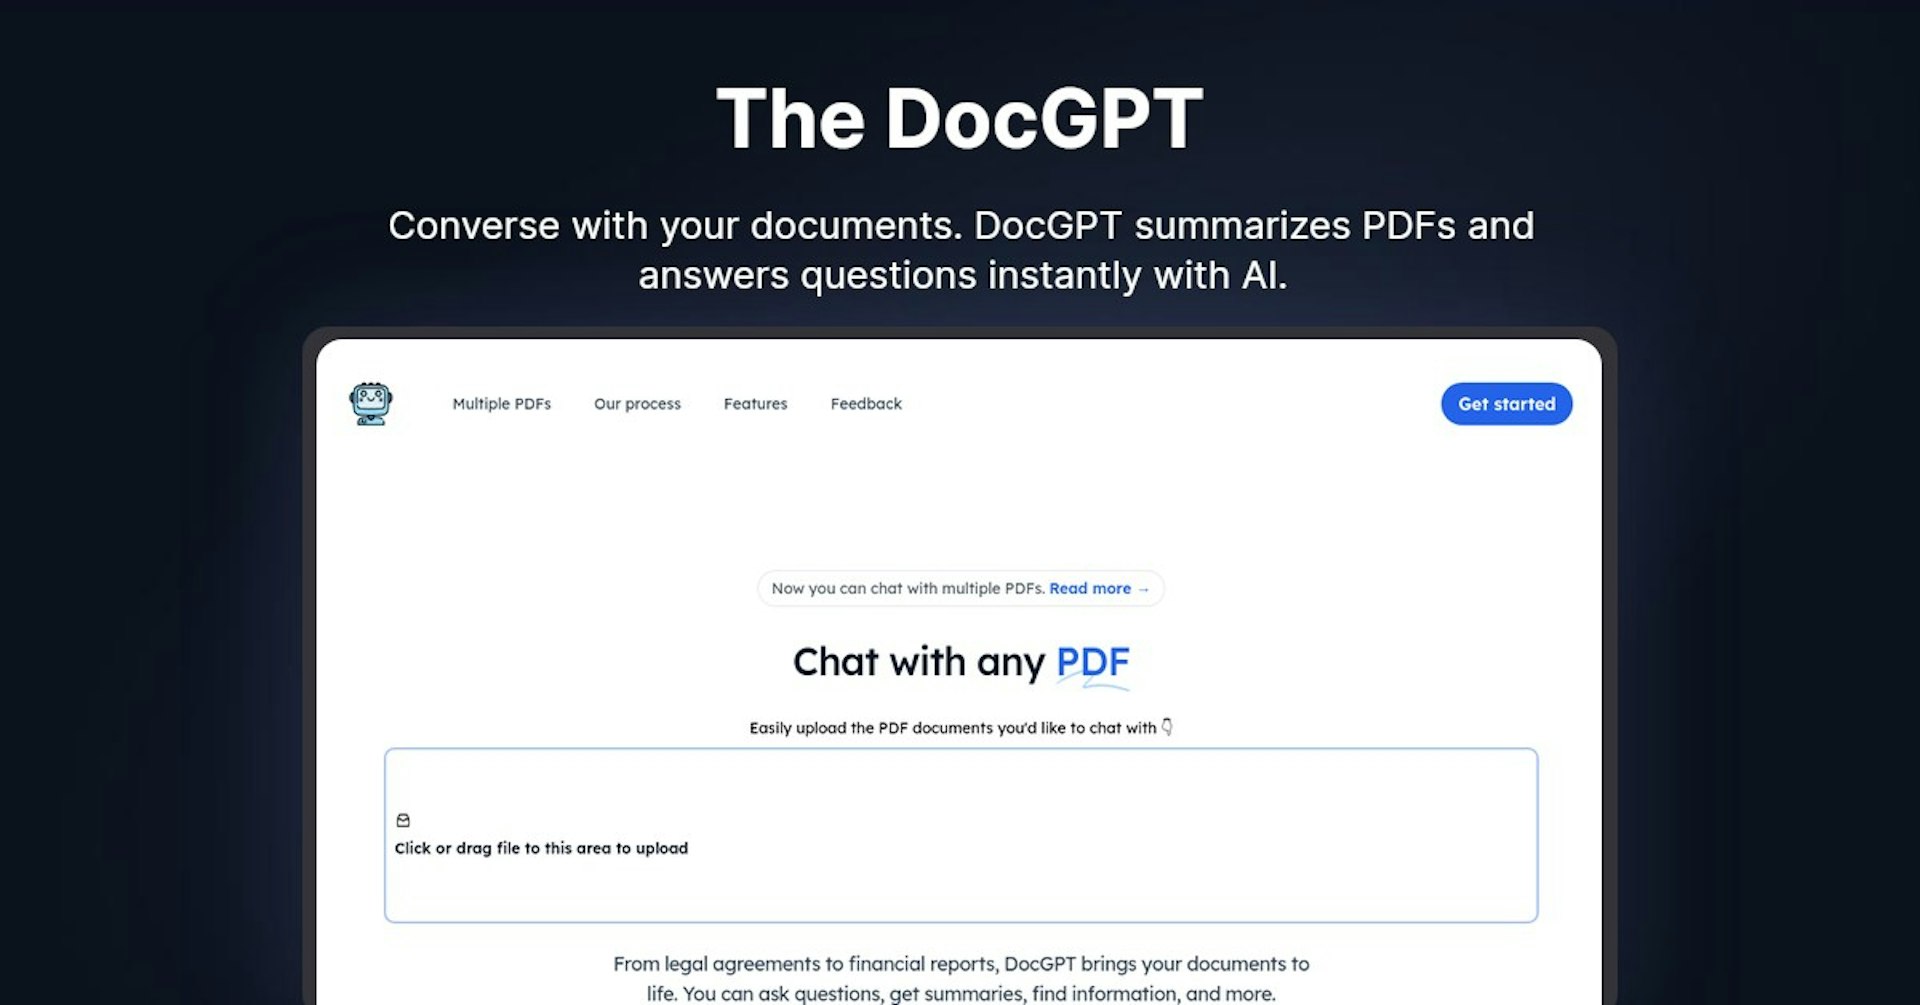 The DocGPT